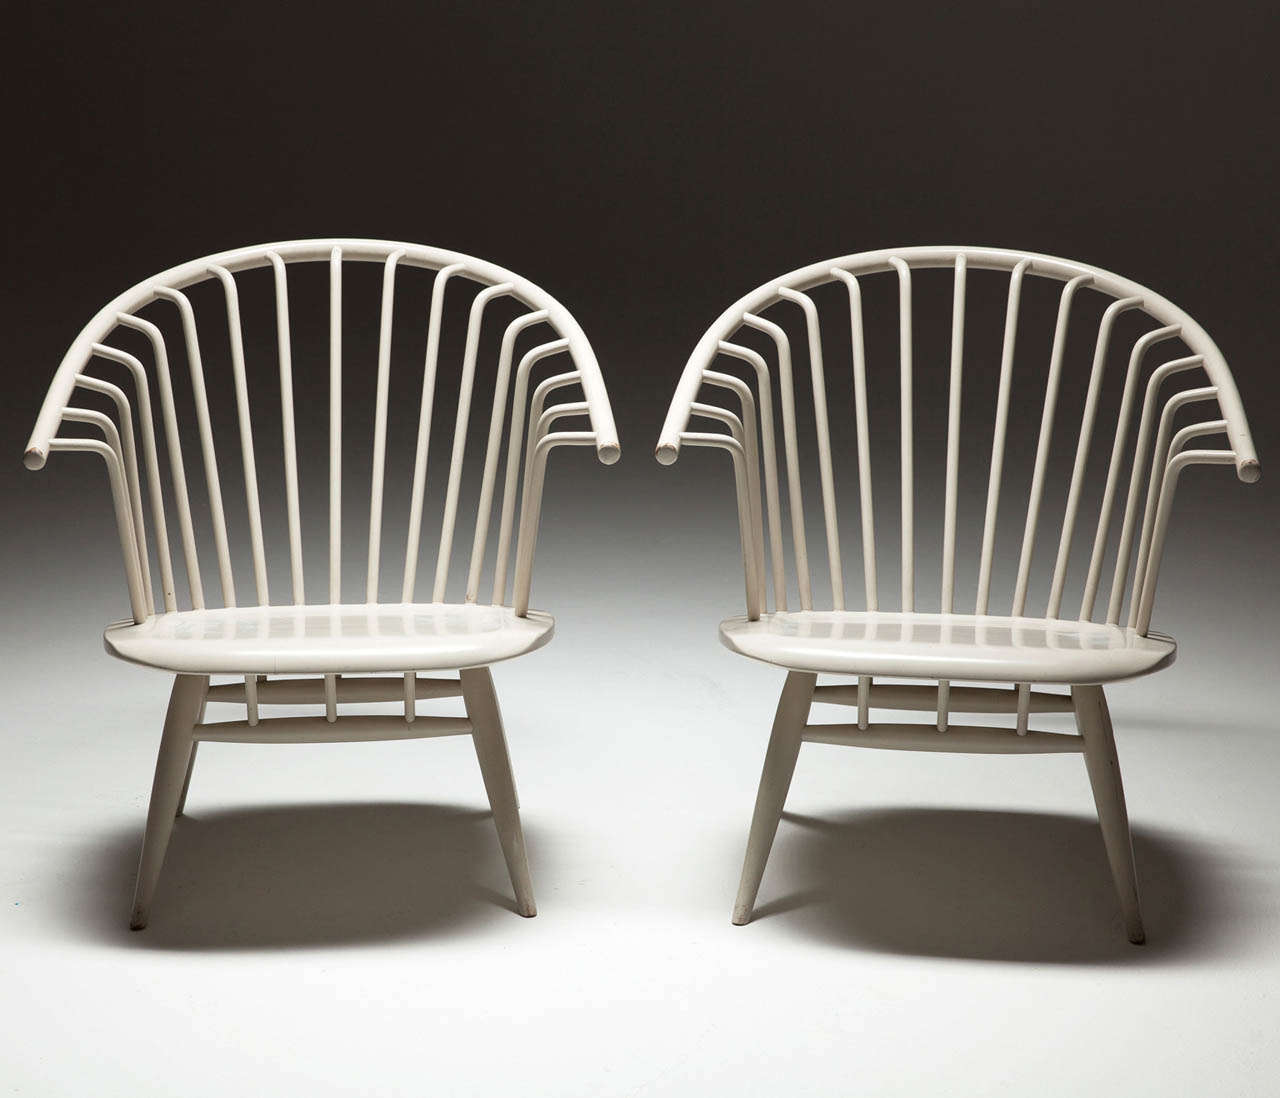 Very nice conditioned pair of early 'Crinolette' chairs designed by Ilmari Tapiaovaara, made by Asko, Finland. Made in the 1960's.

This matching pair forms a interesting and fresh couple which adorns any modern or classic interior.

Very